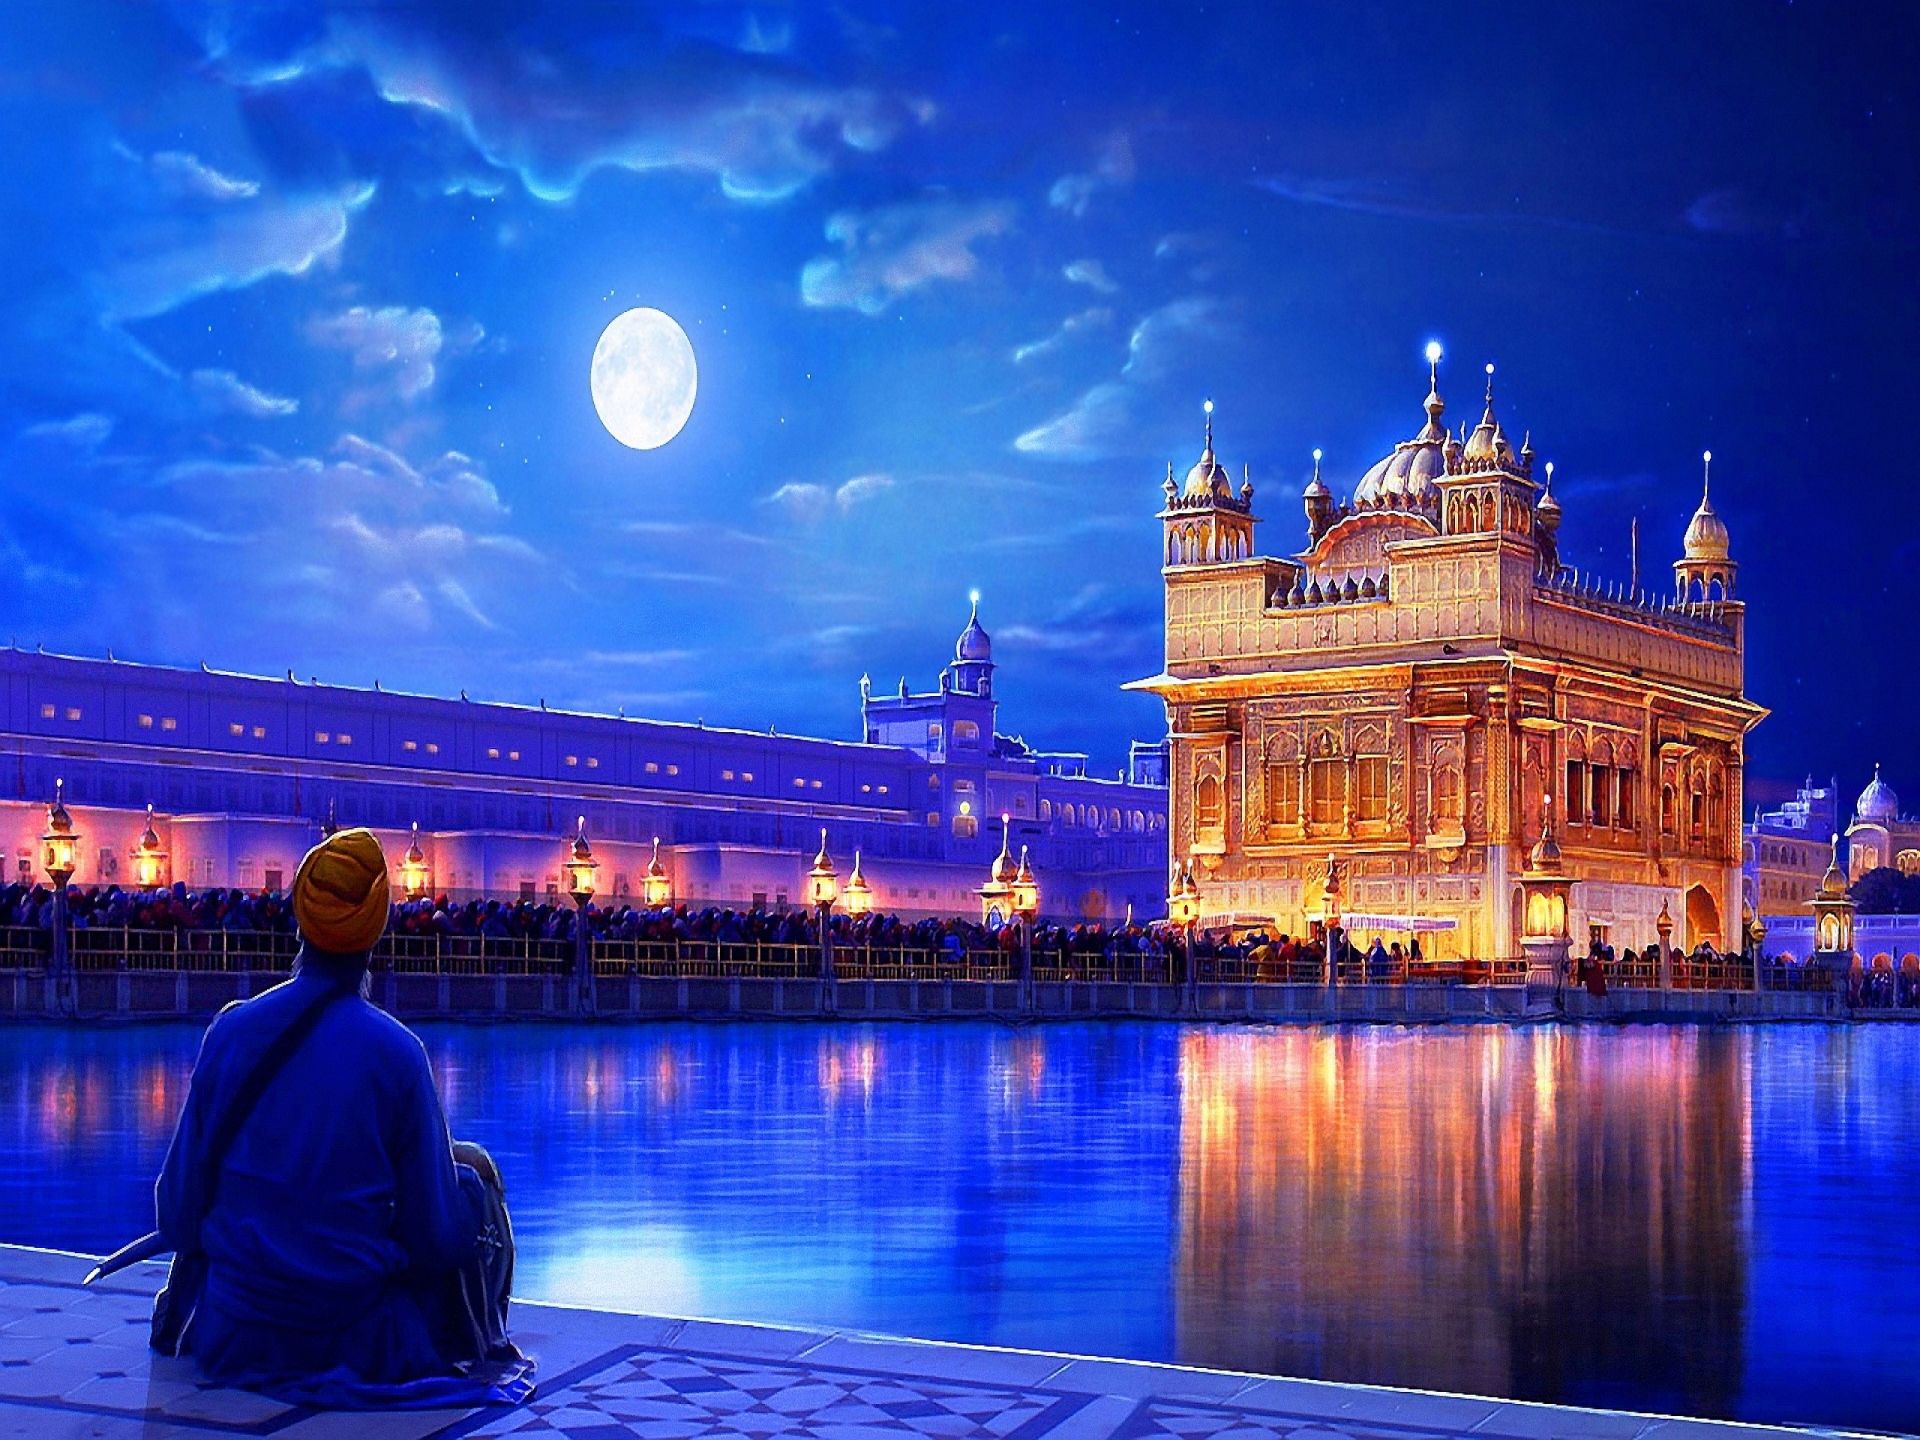 Golden Temple Amritsar India for 1920 x 1440 resolution